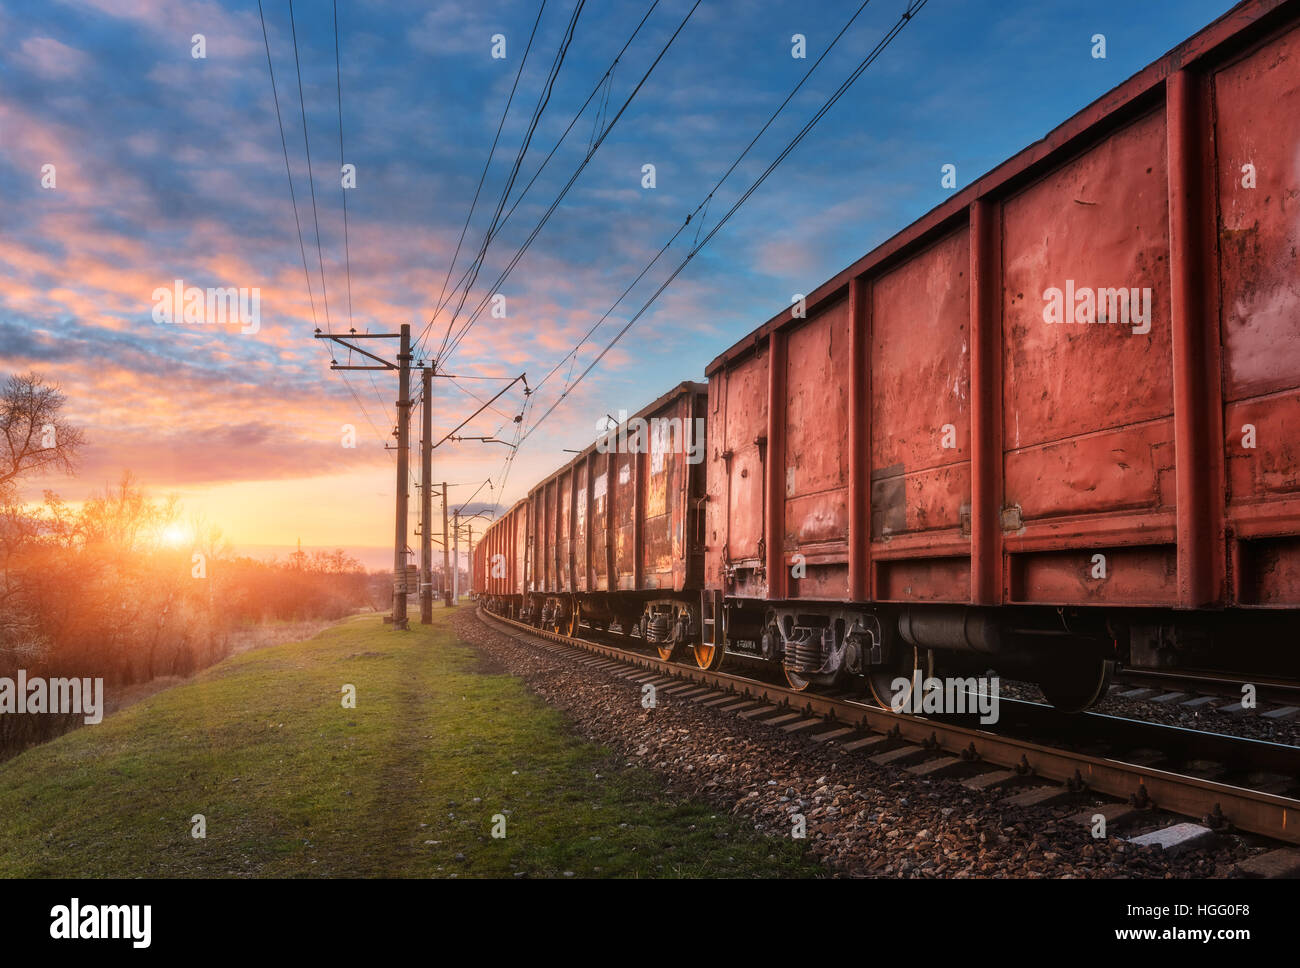 Railway station with cargo wagons and train against sunny sky with clouds in the evening. Colorful industrial landscape Stock Photo